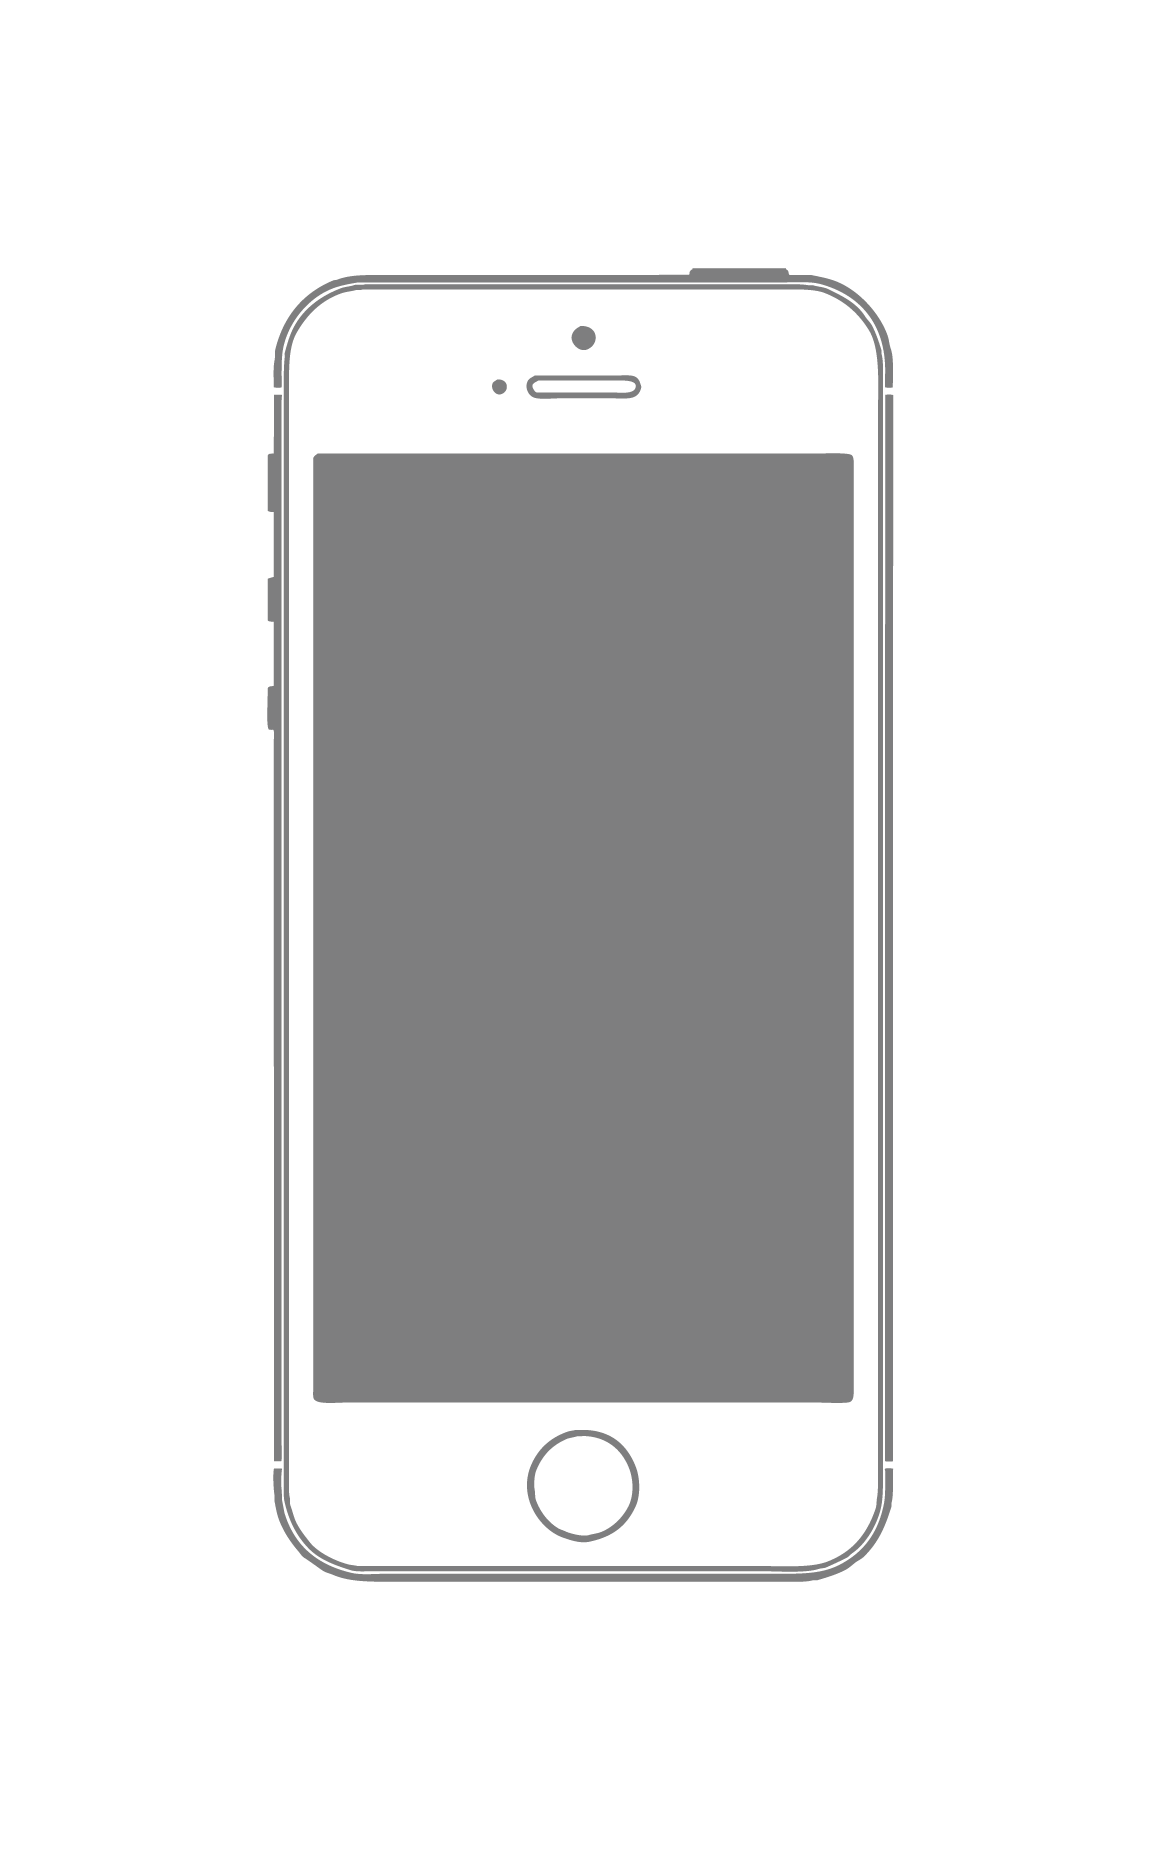 Clix Smartphone Material Frame White PNG